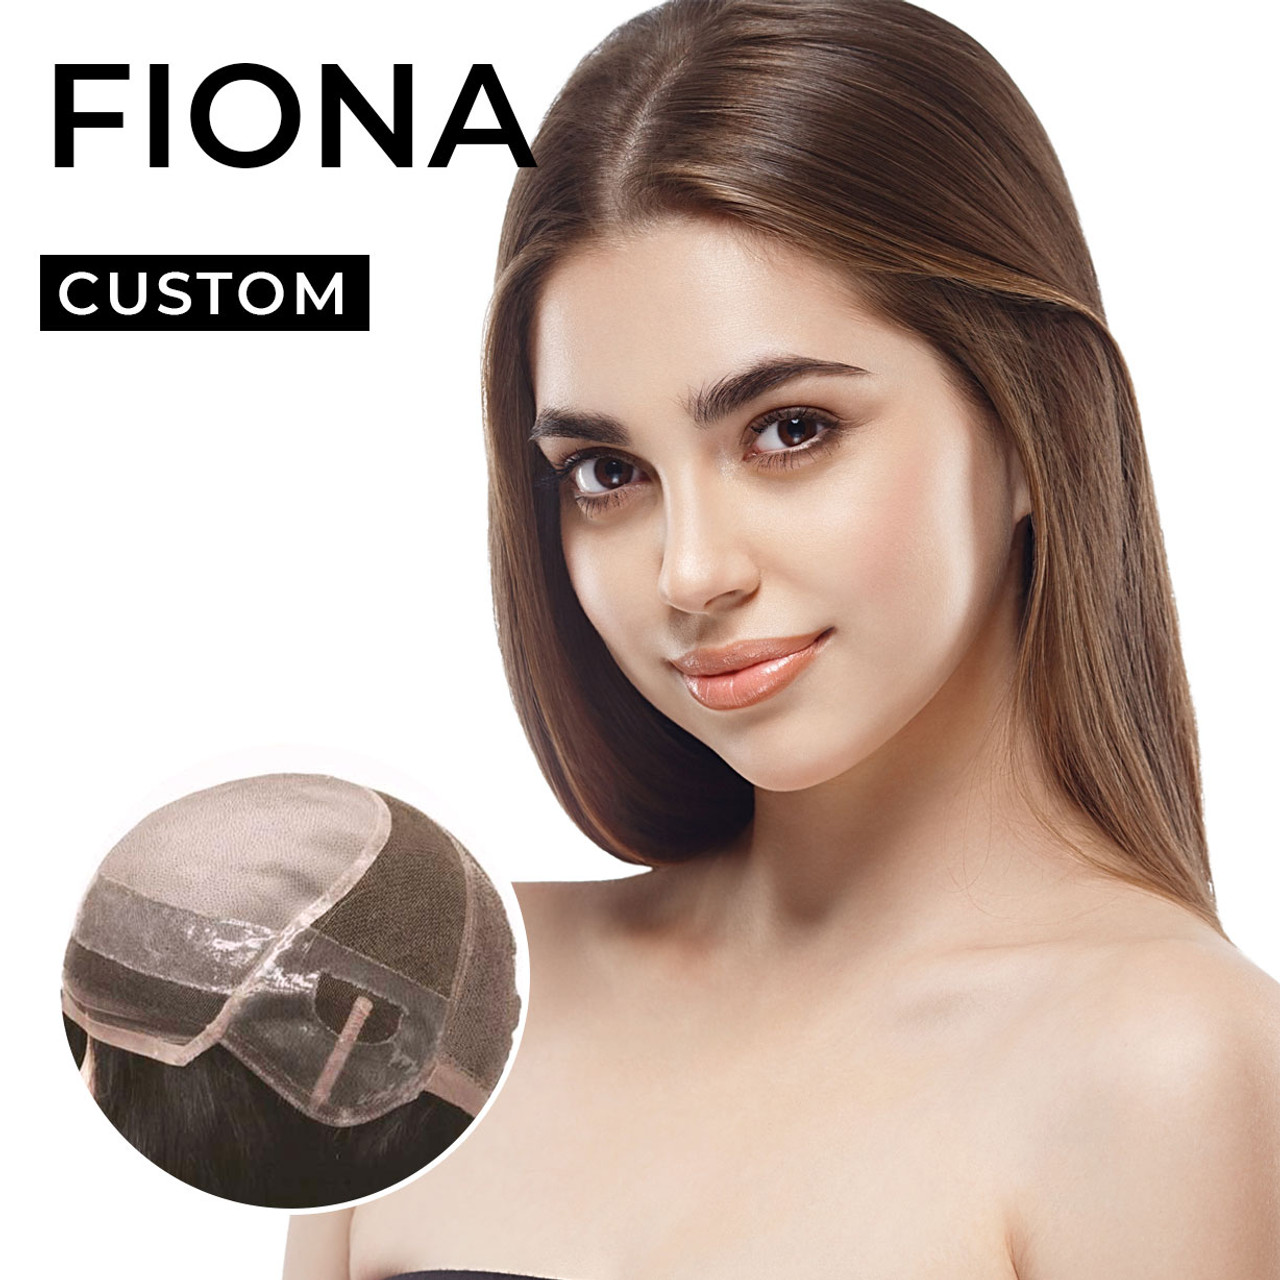 Custom Wig Certification Class and kit